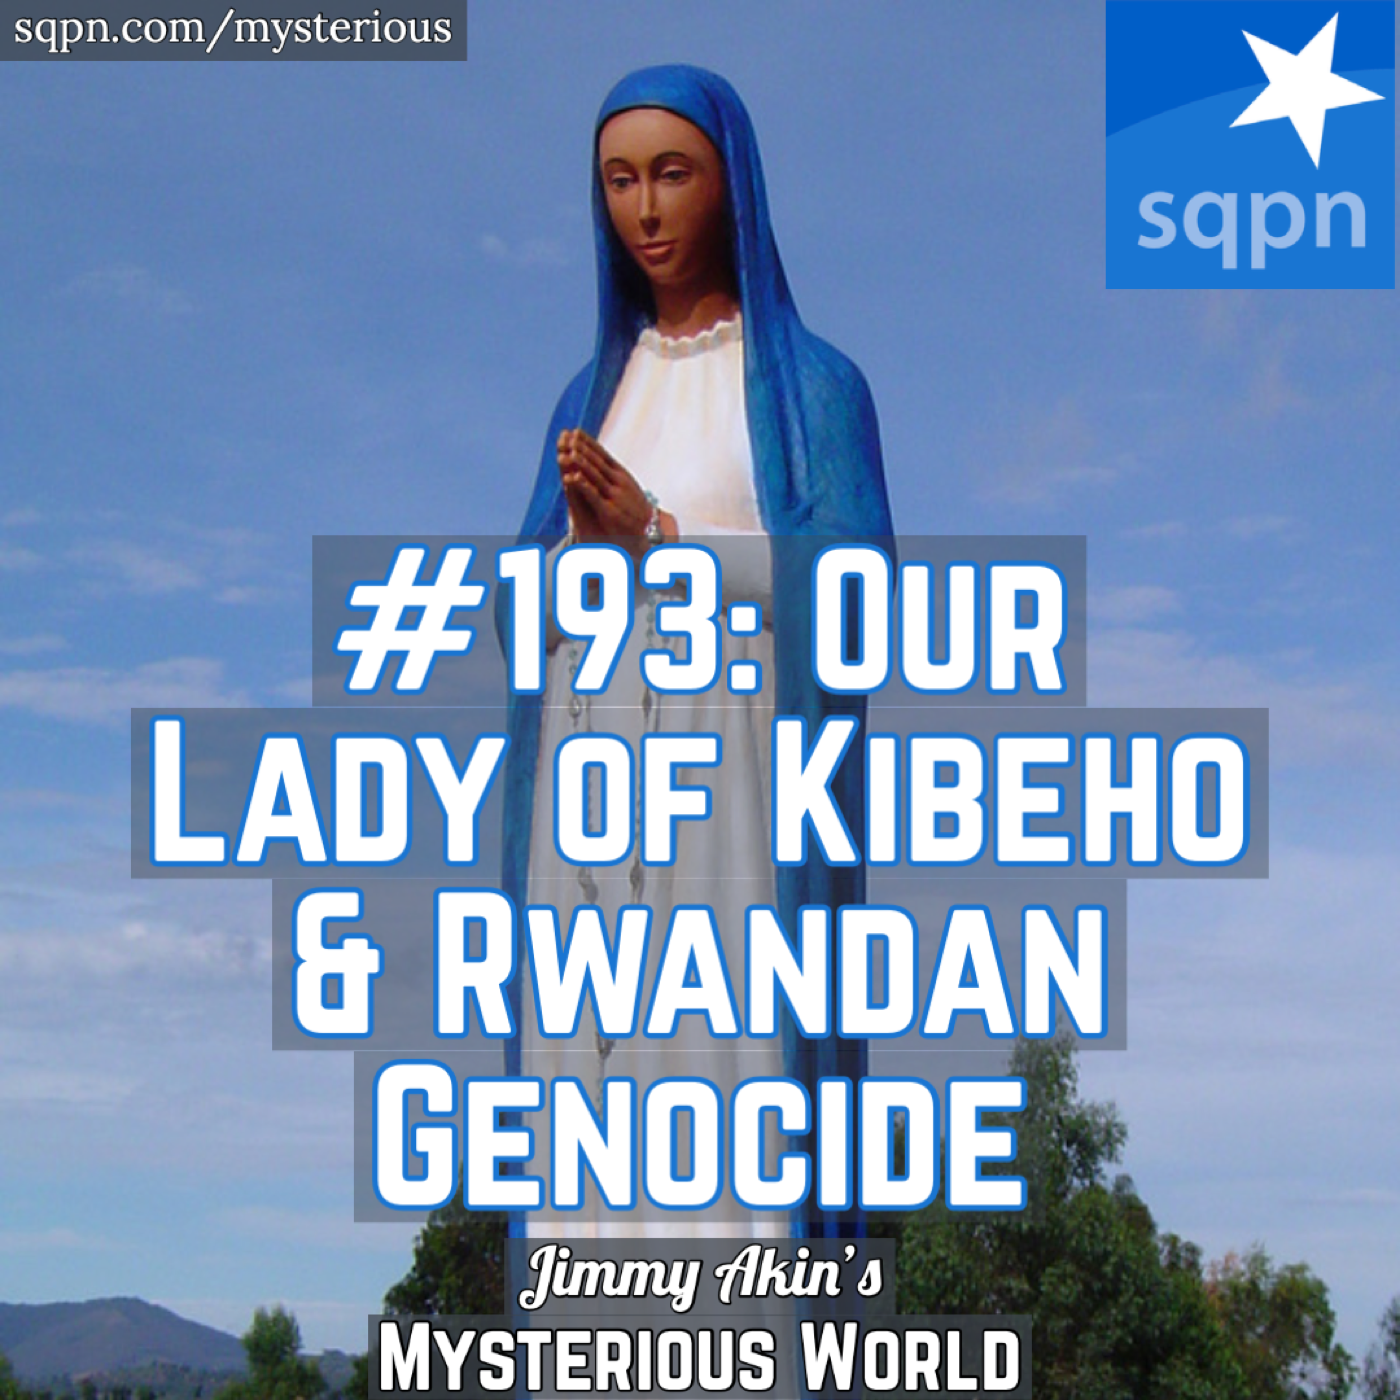 Our Lady of Kibeho and the Rwandan Genocide